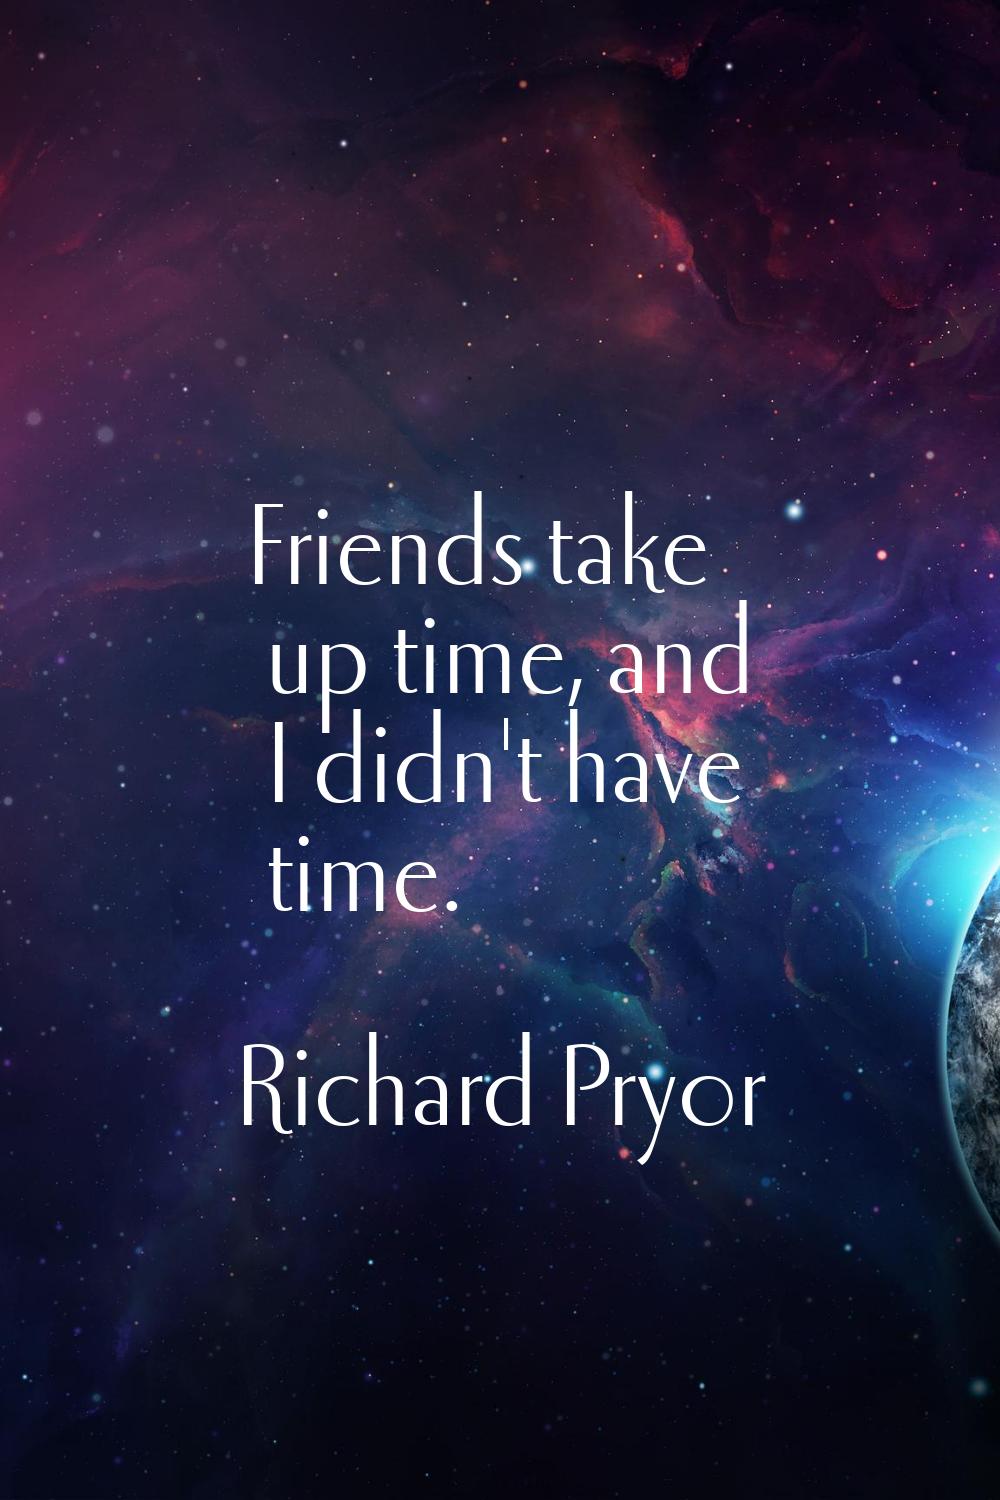 Friends take up time, and I didn't have time.